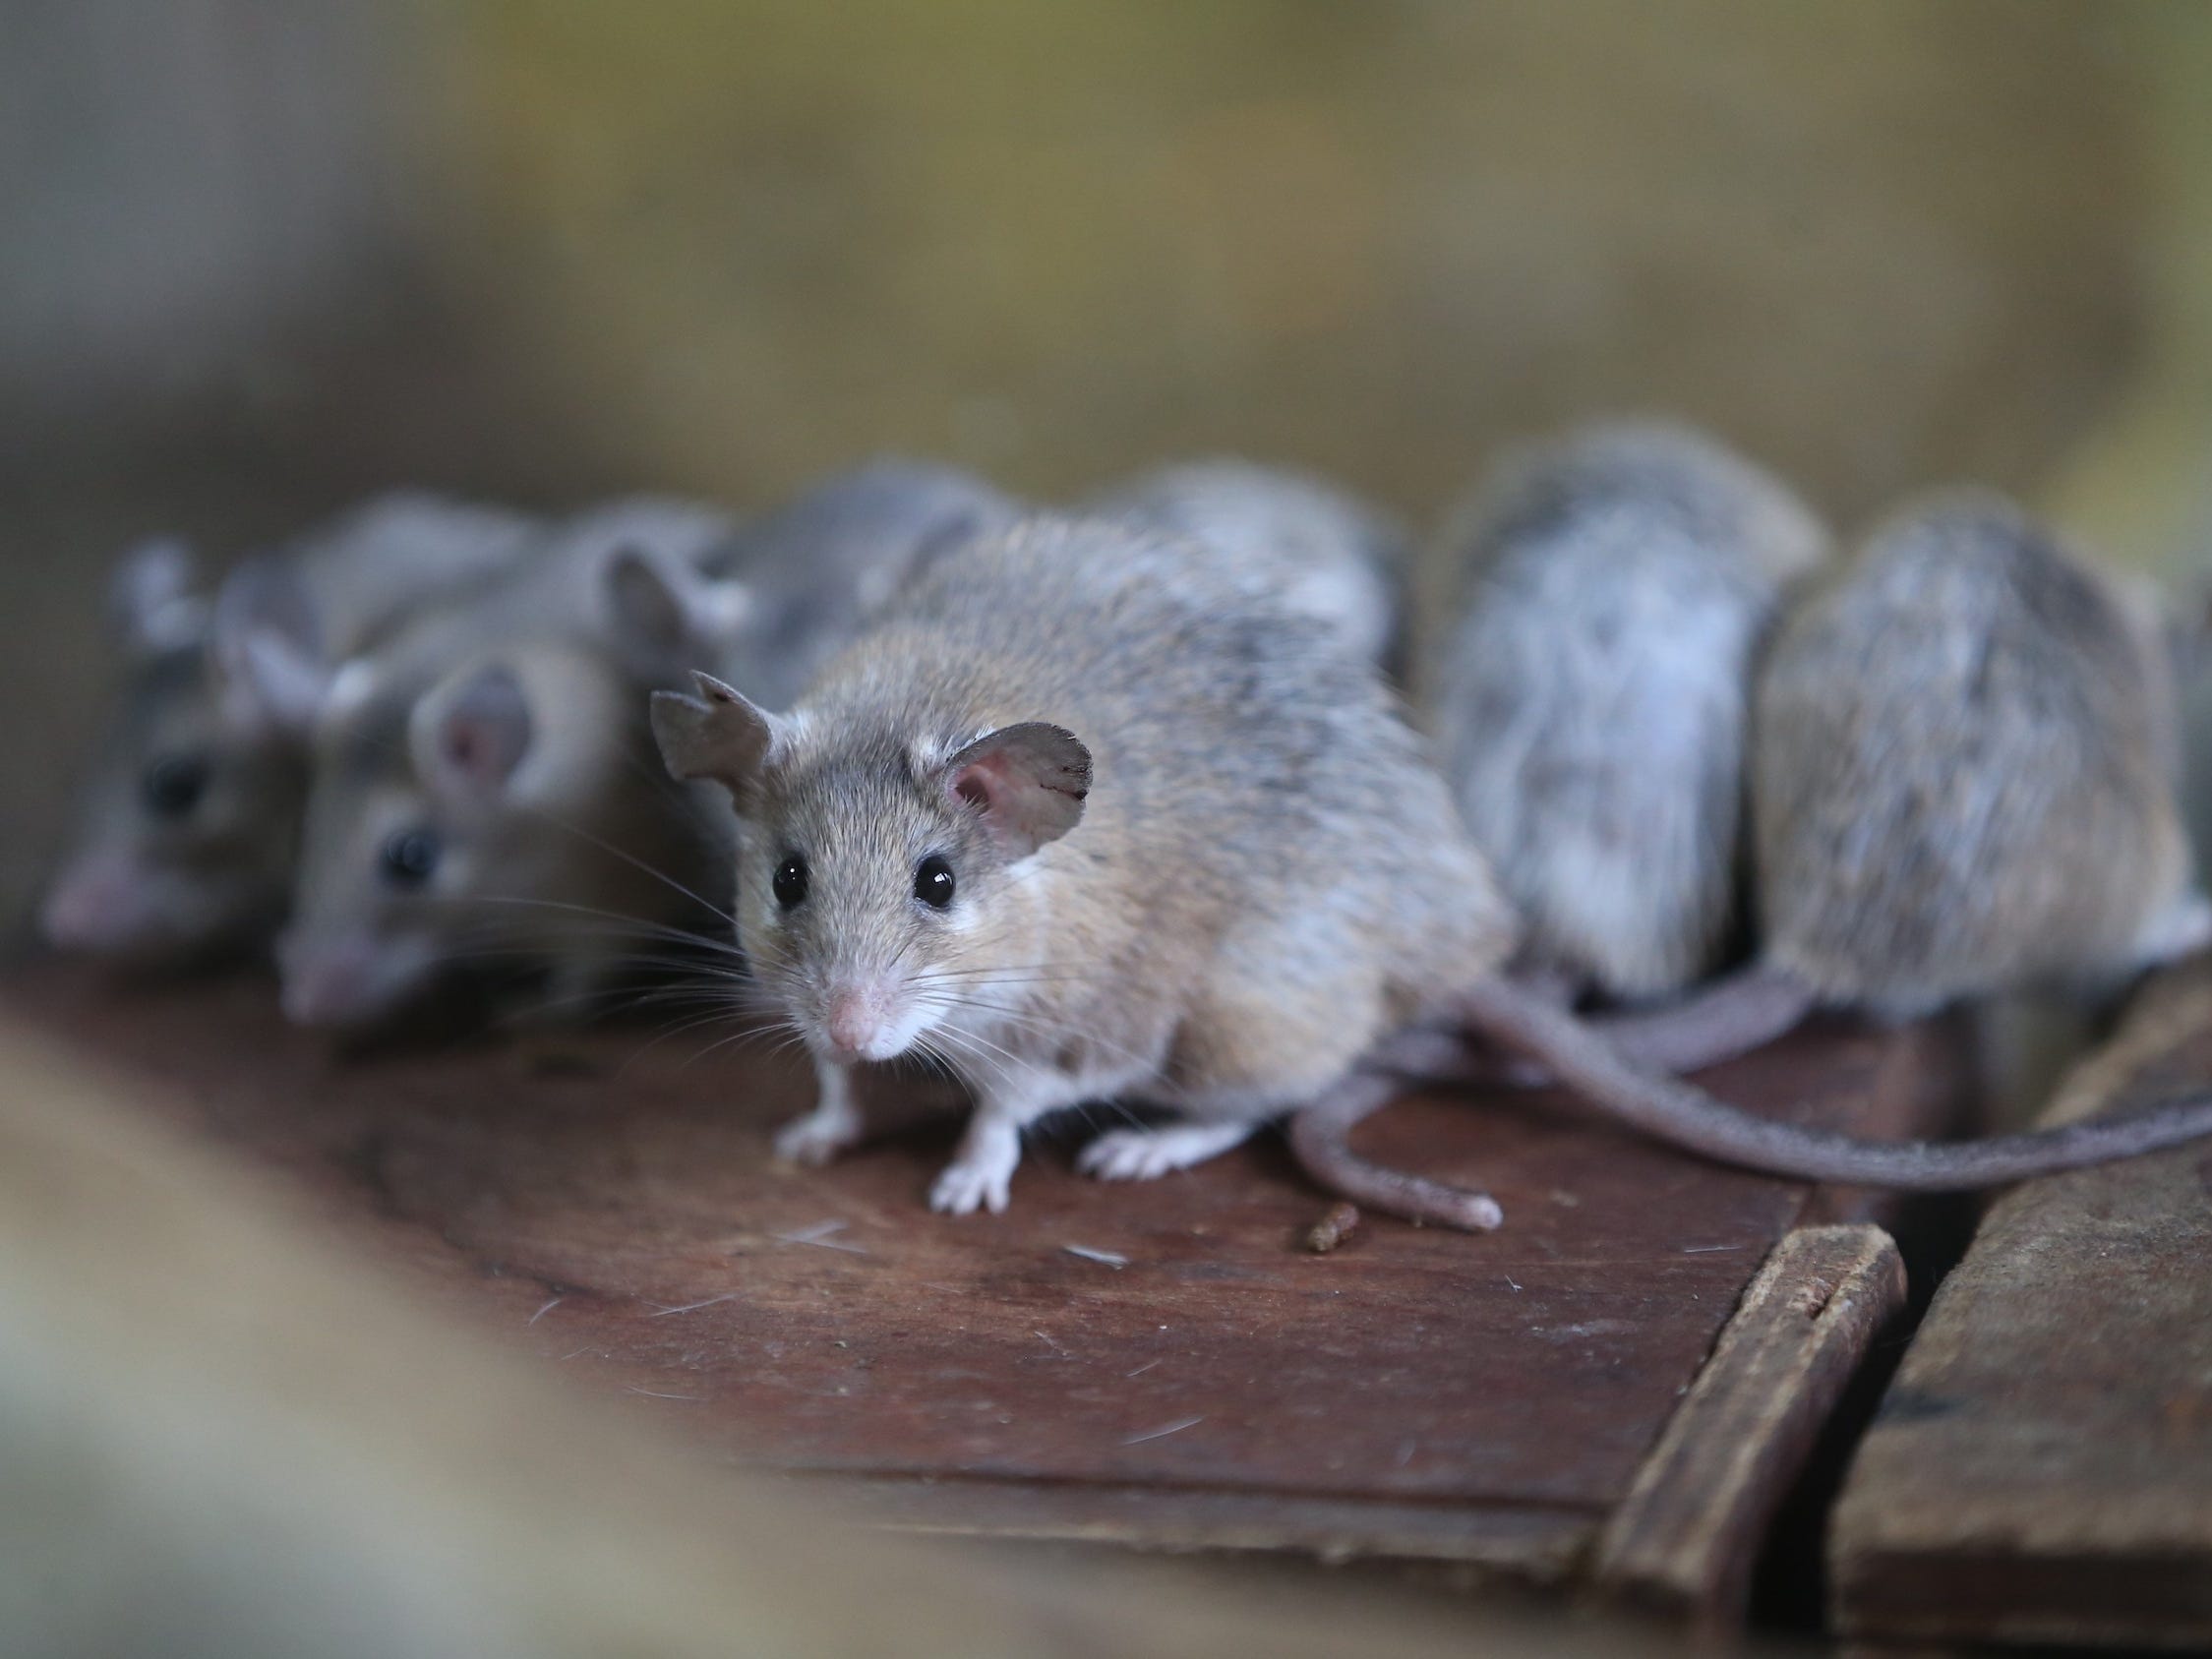 spiny mice crowded on wood surface